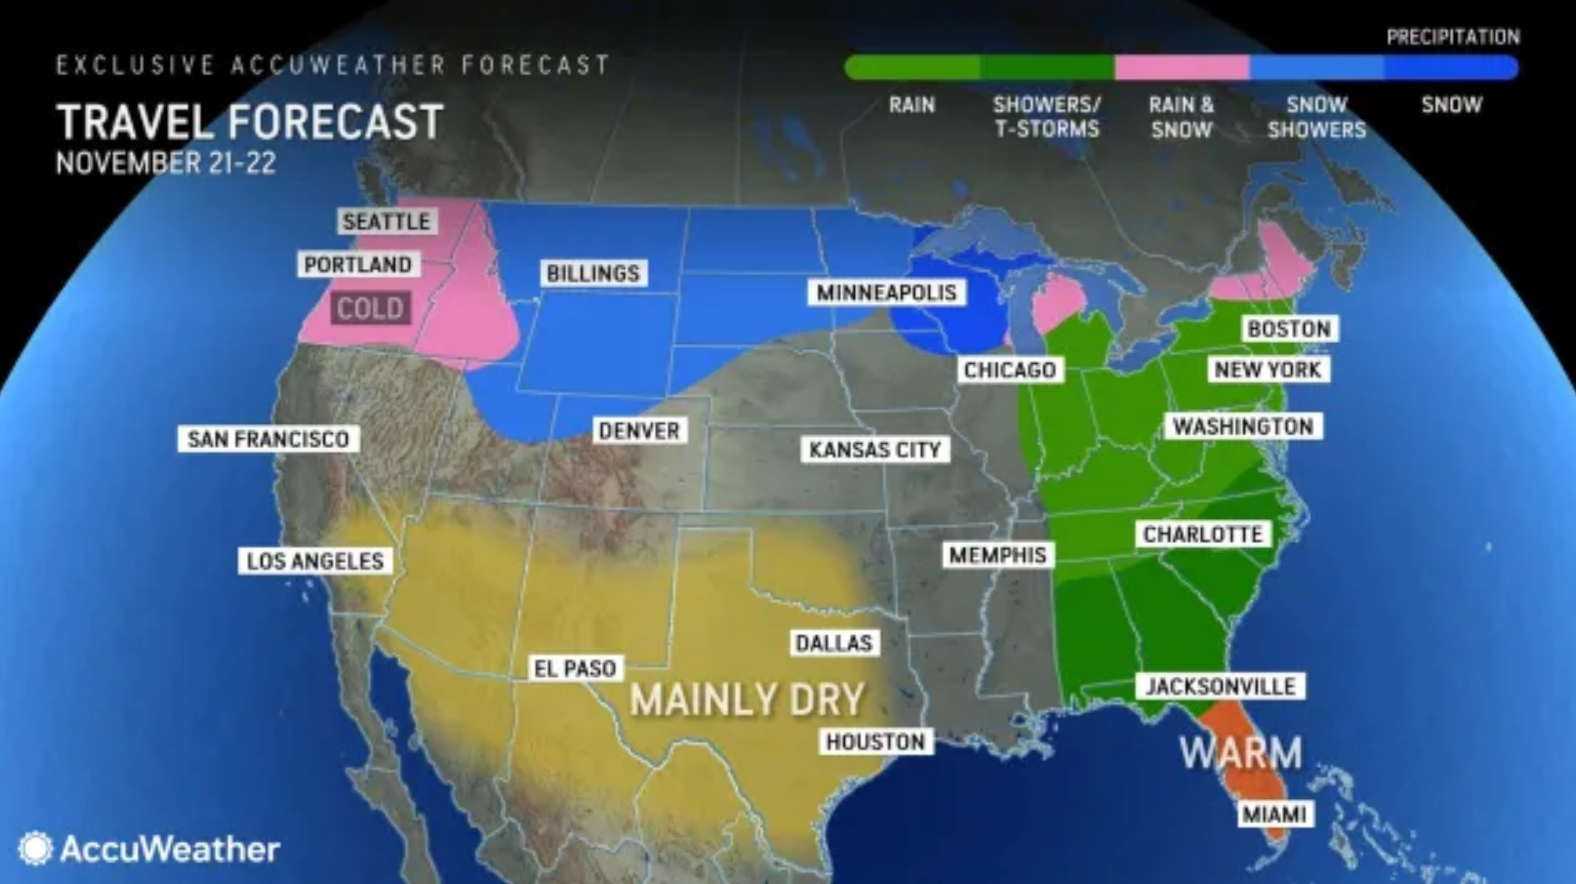 The early travel forecast for Thanksgiving includes two potential storm threats